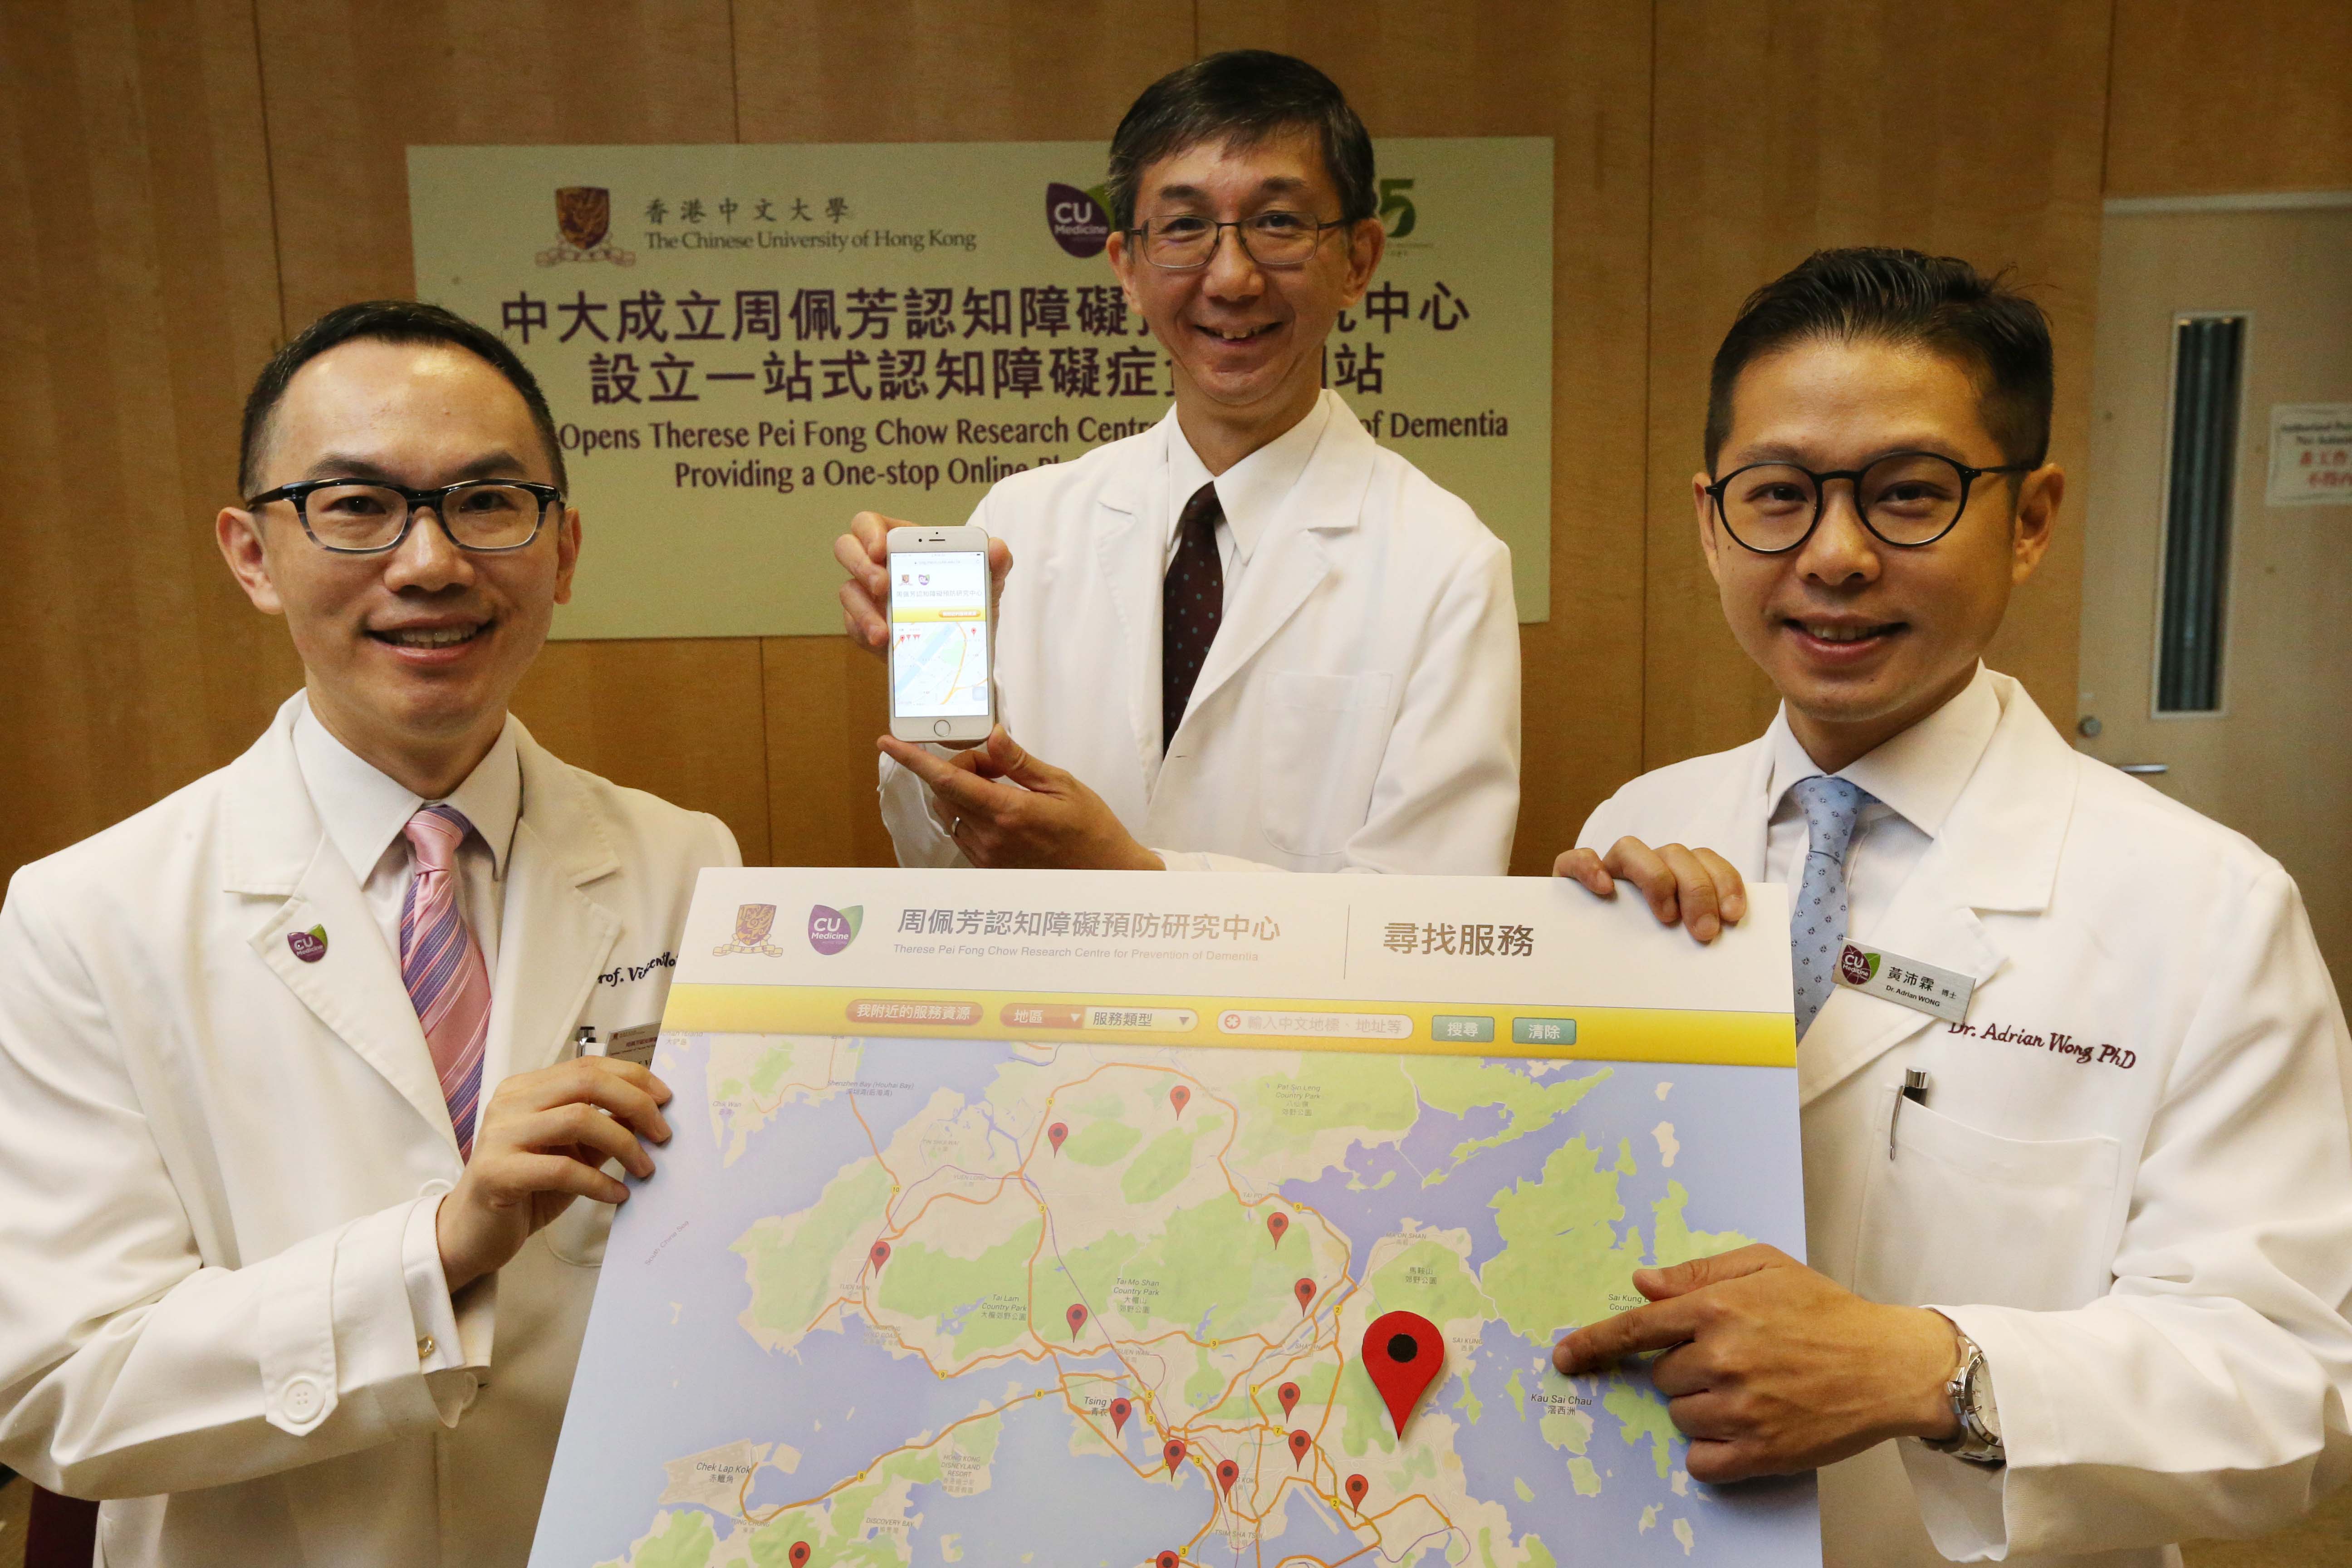 Prof. Vincent Chung Tong MOK, Division of Neurology, Department of Medicine and Therapeutics; Prof. Timothy Chi Yui KWOK